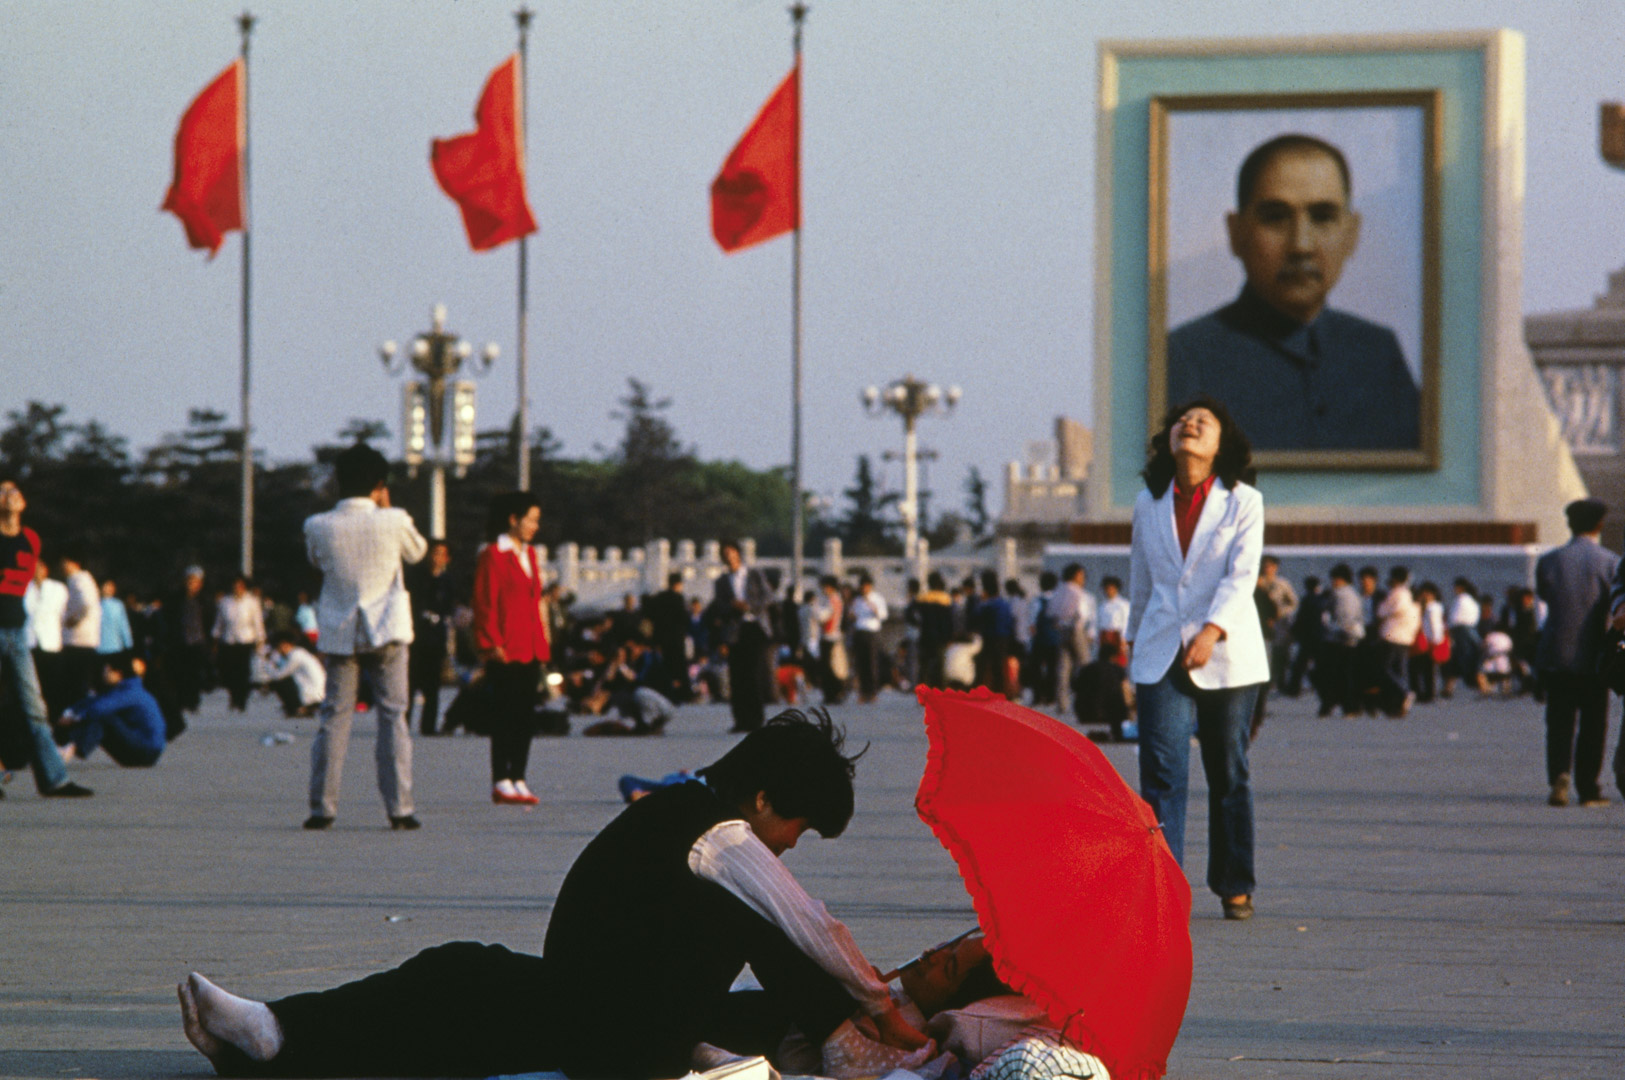 Beijing China People Freedom Tiananmen Square Crowd Protestors Group Of People 1989 Year Flag Umbrel 1625x1080